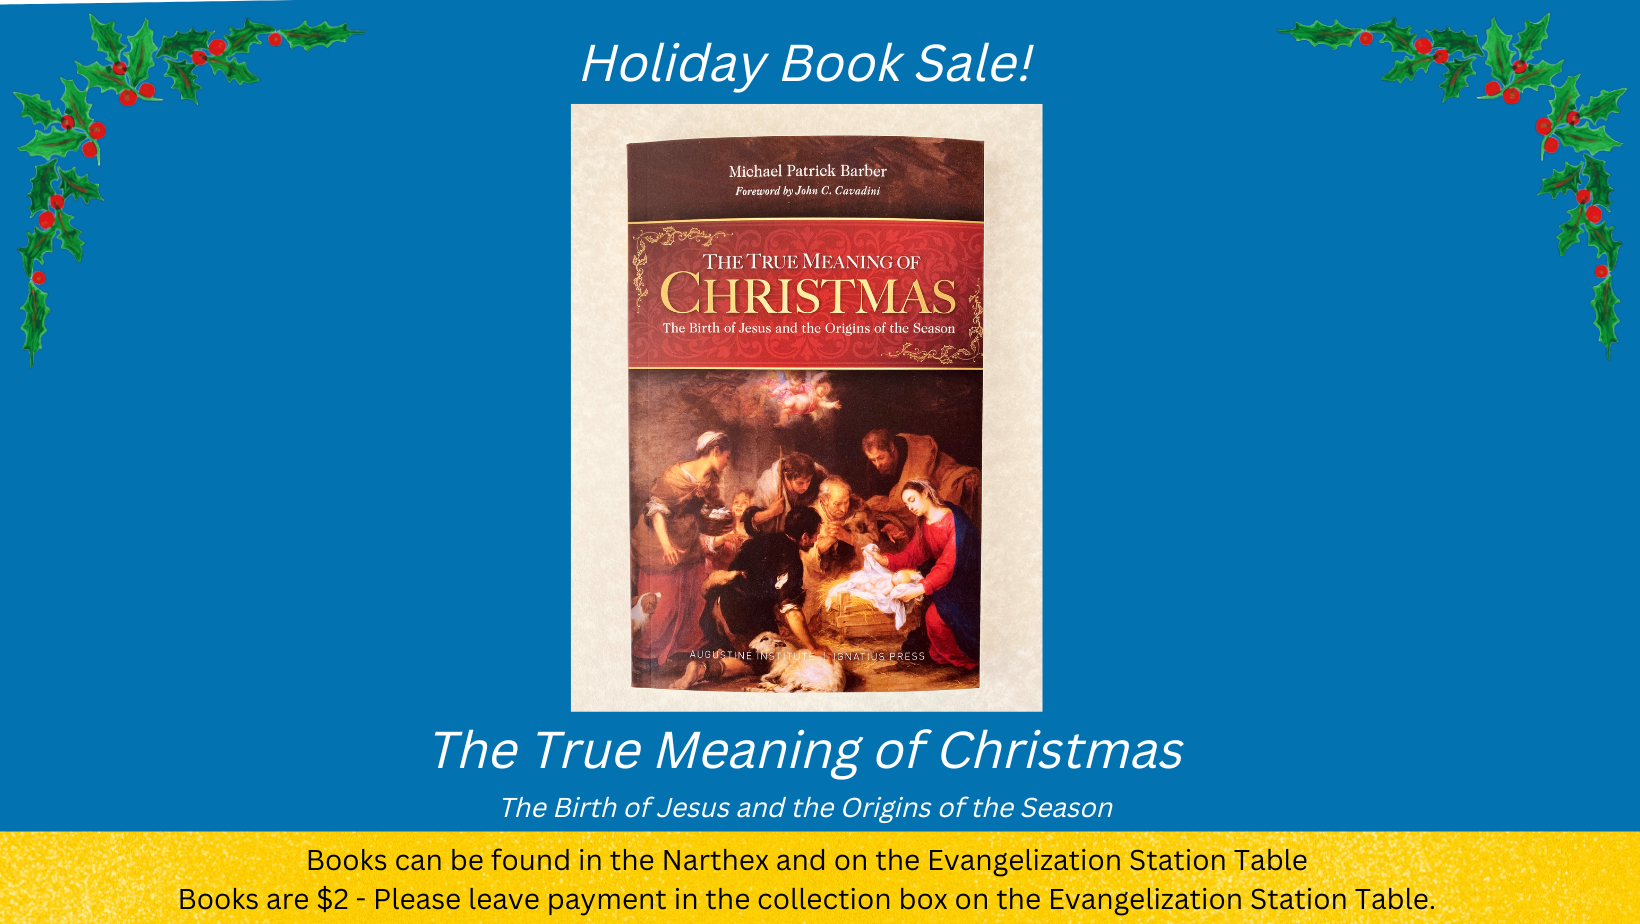 The True Meaning of Christmas Books For Sale Homepage Tile